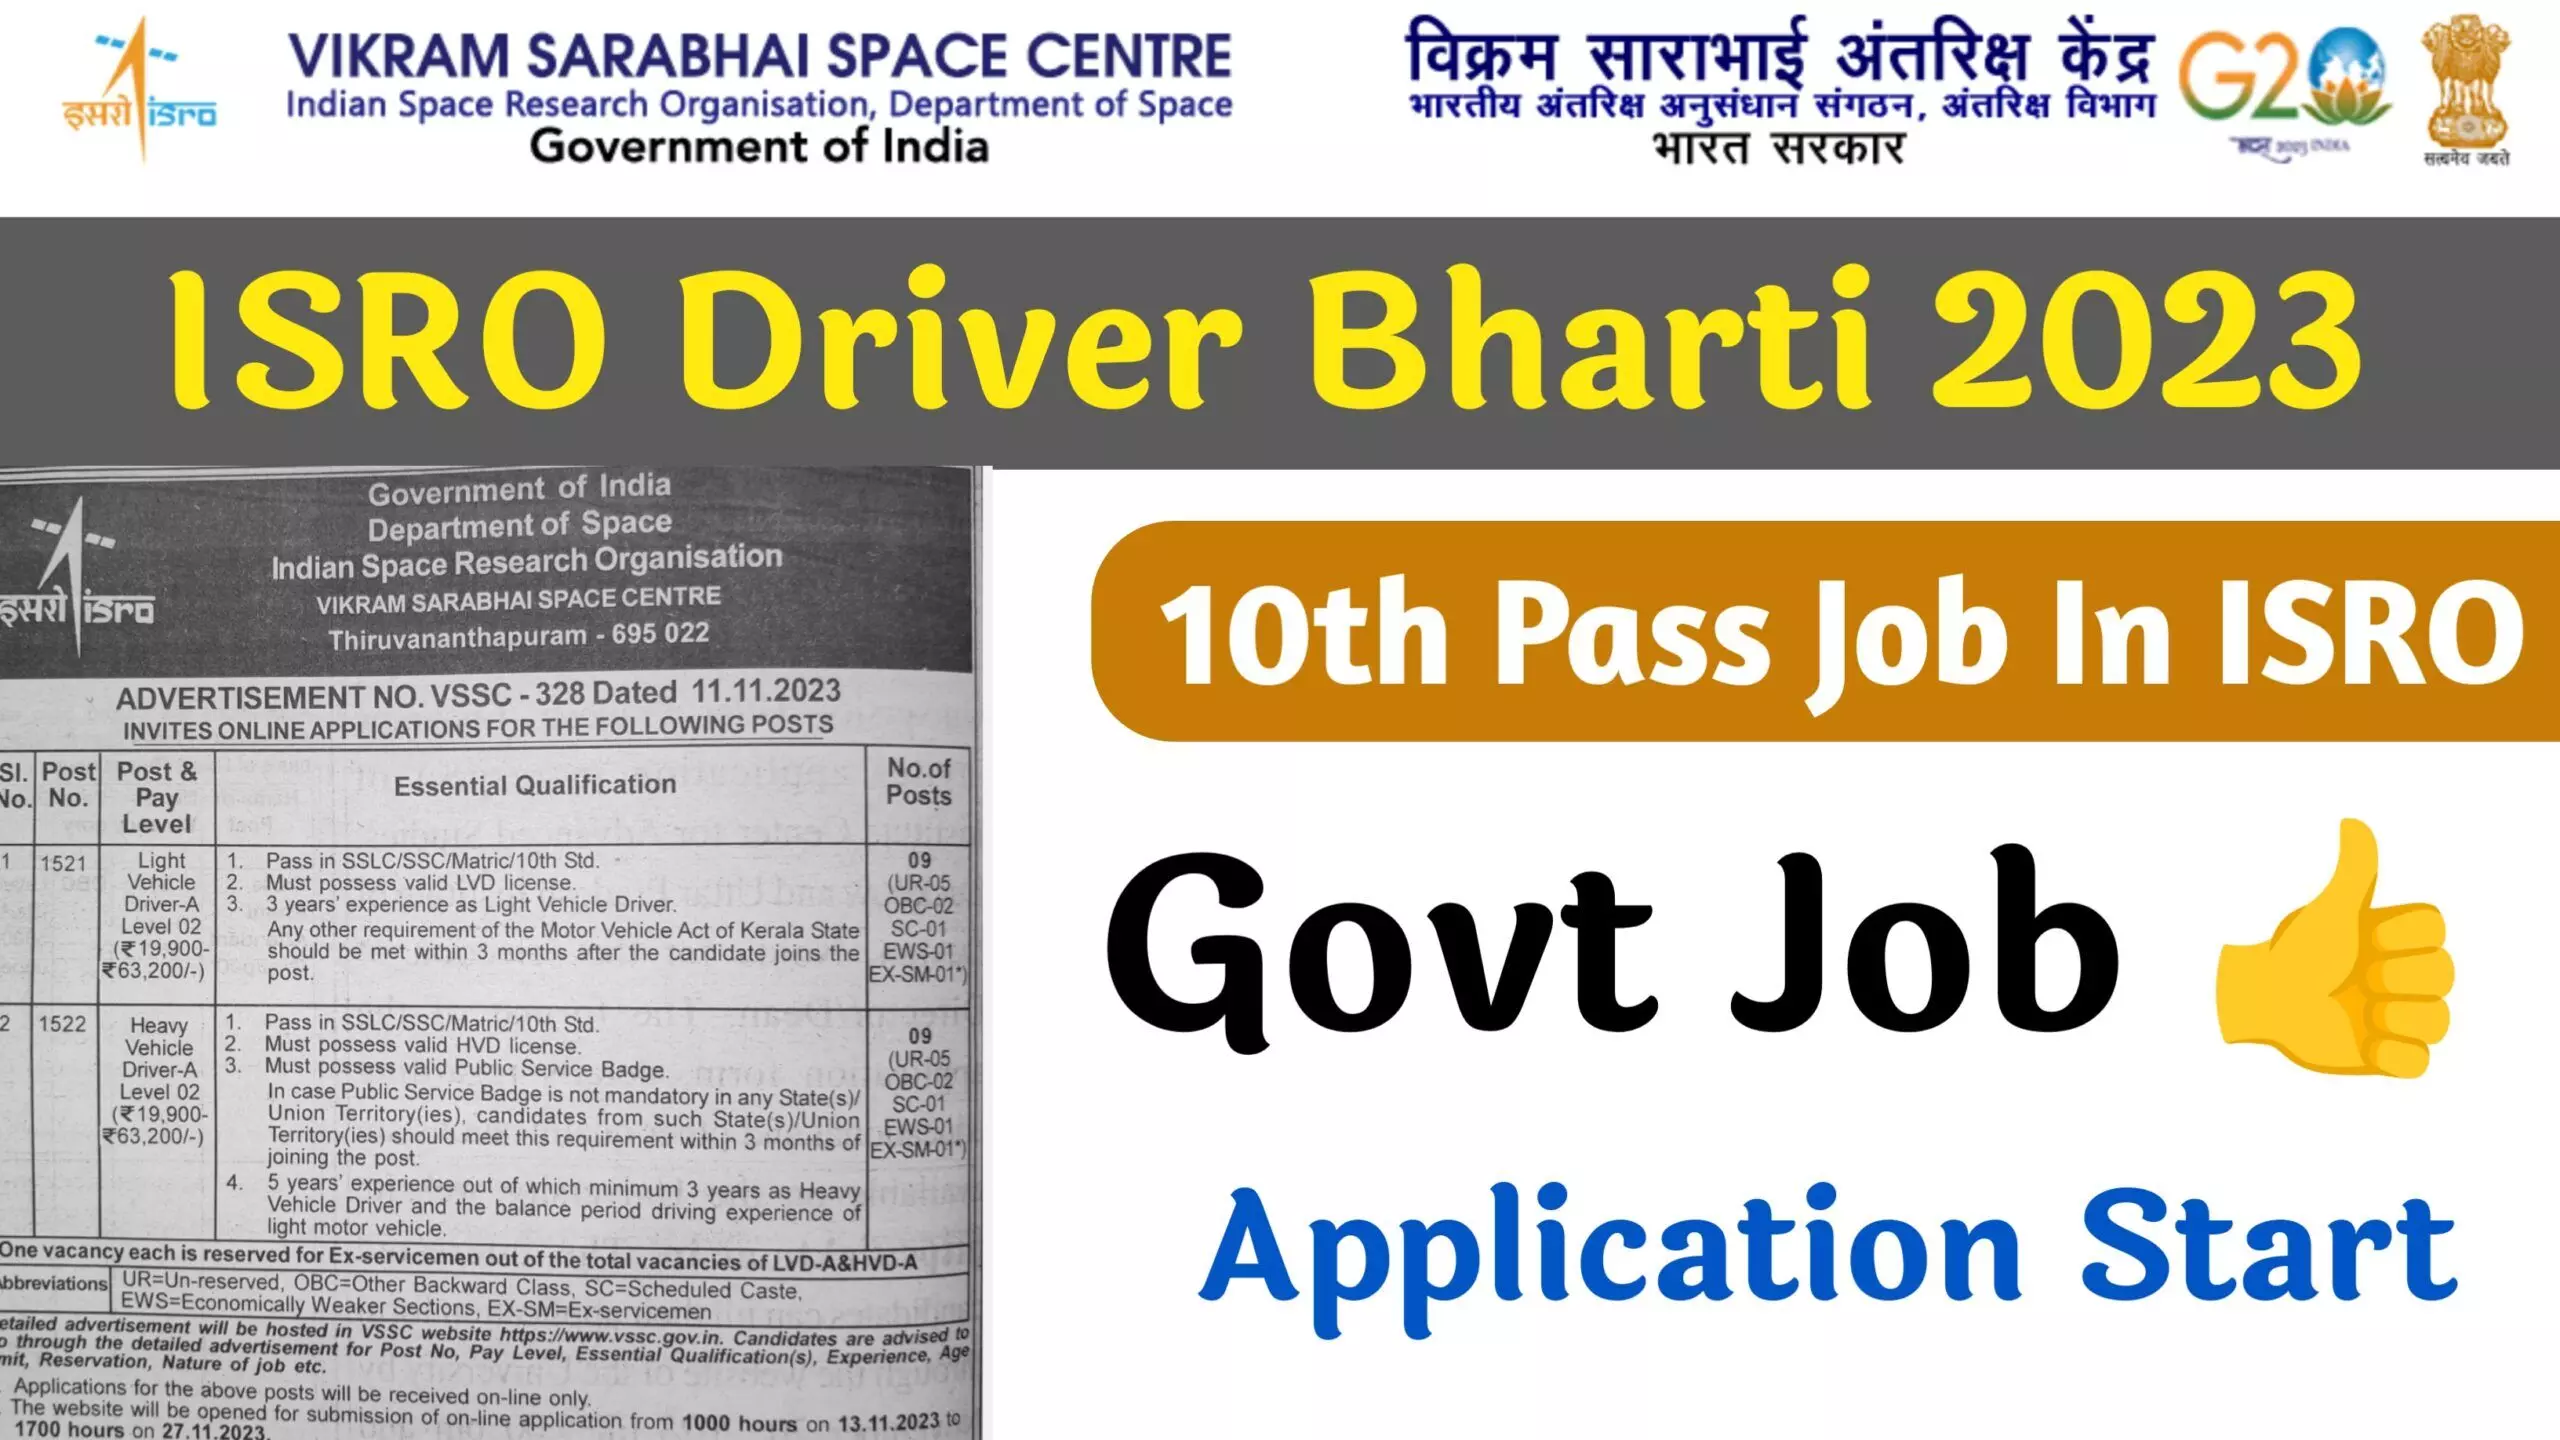 Recruitment for driver posts in ISRO